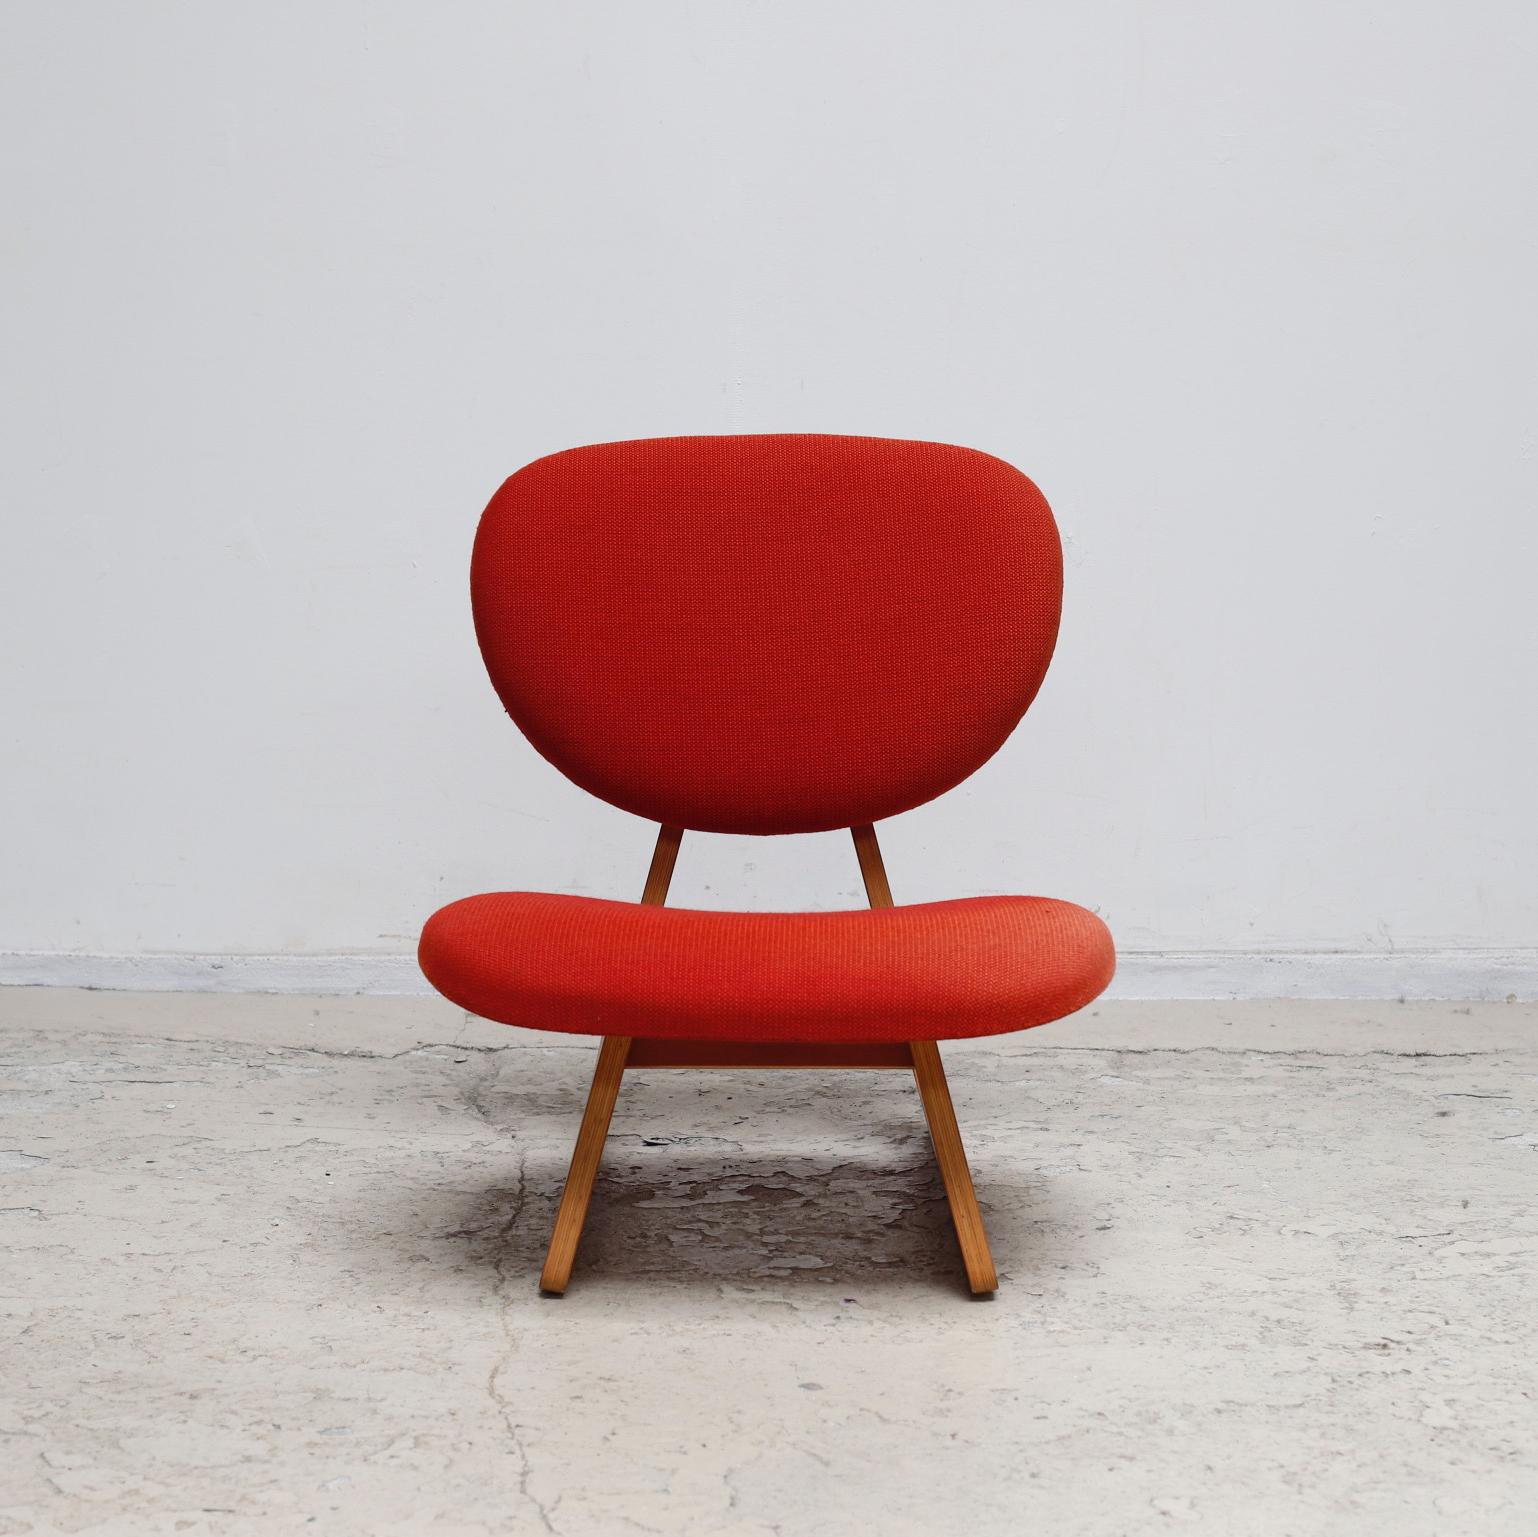 Lounge chair designed by Junzo Sakakura manufactured by Tendo in Japan.
Manufacturers' seals are in existence.
This seal was used in the 1970s.
The kanji seal was used before it was exhibited in Milan Salone.
The fabric is also original.
The